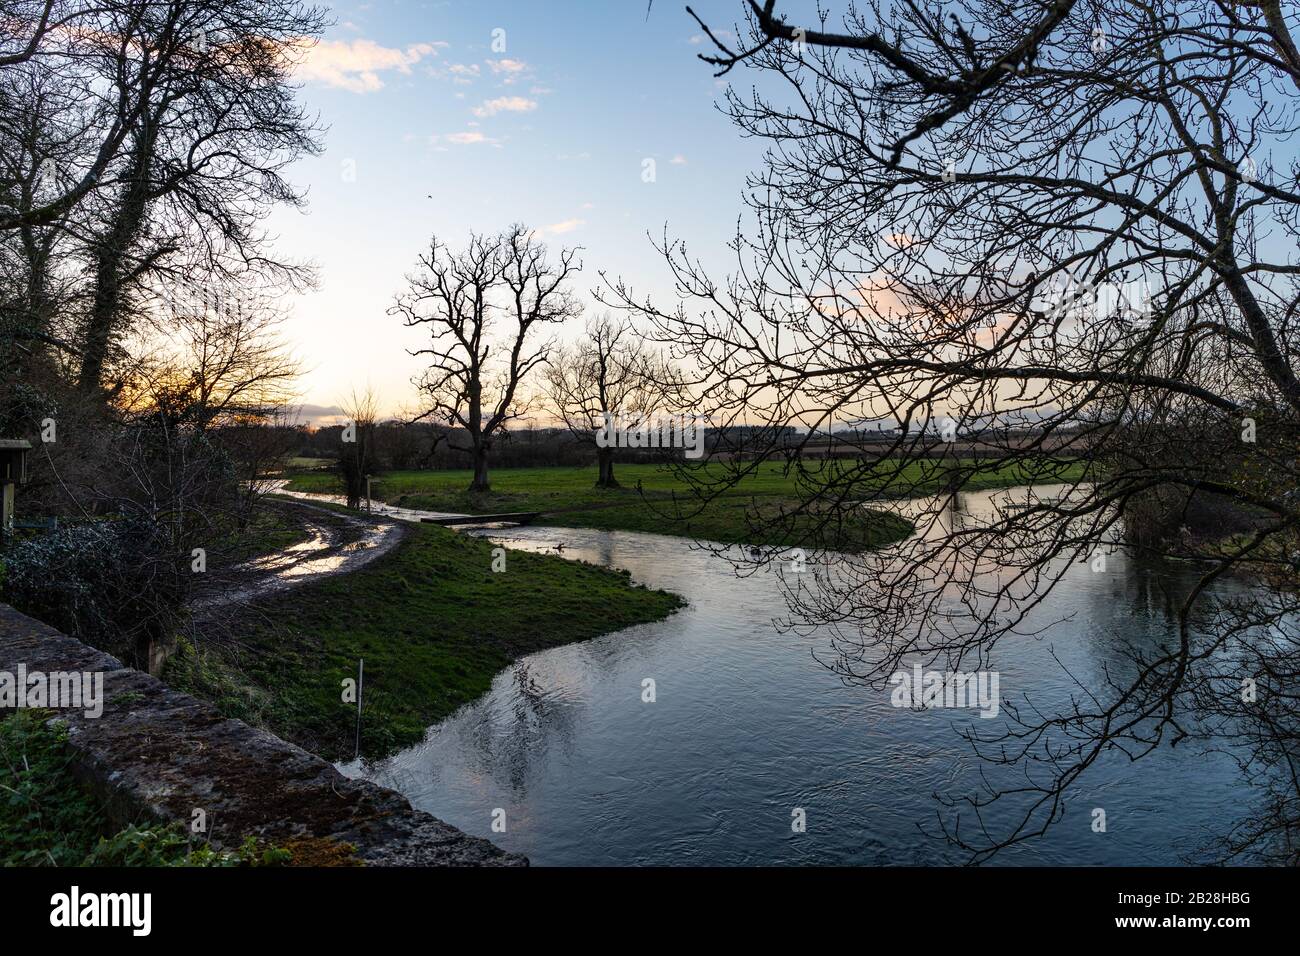 Pictures Taken Near The Source Of The Thames Walk Near To The Village of Kemble In The Cotswolds in England  After The Recent Flooding in Parts of uk. Stock Photo